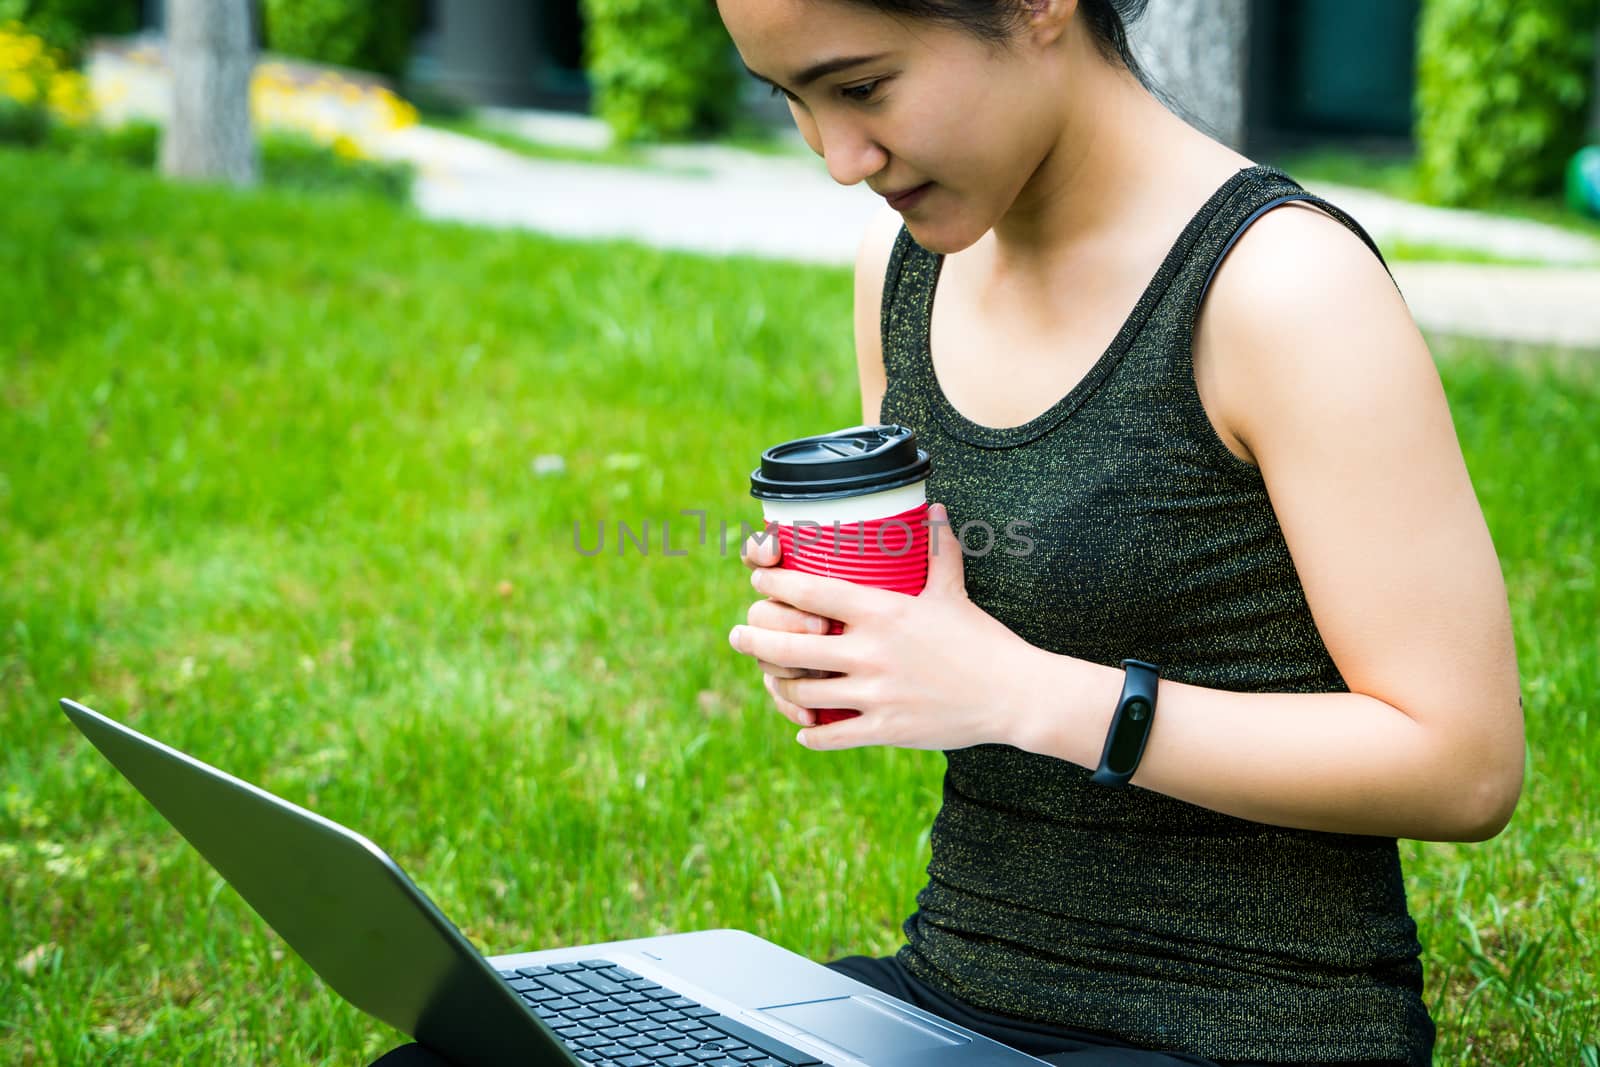 A young woman is looking at laptop computer while holding a red cup of coffee